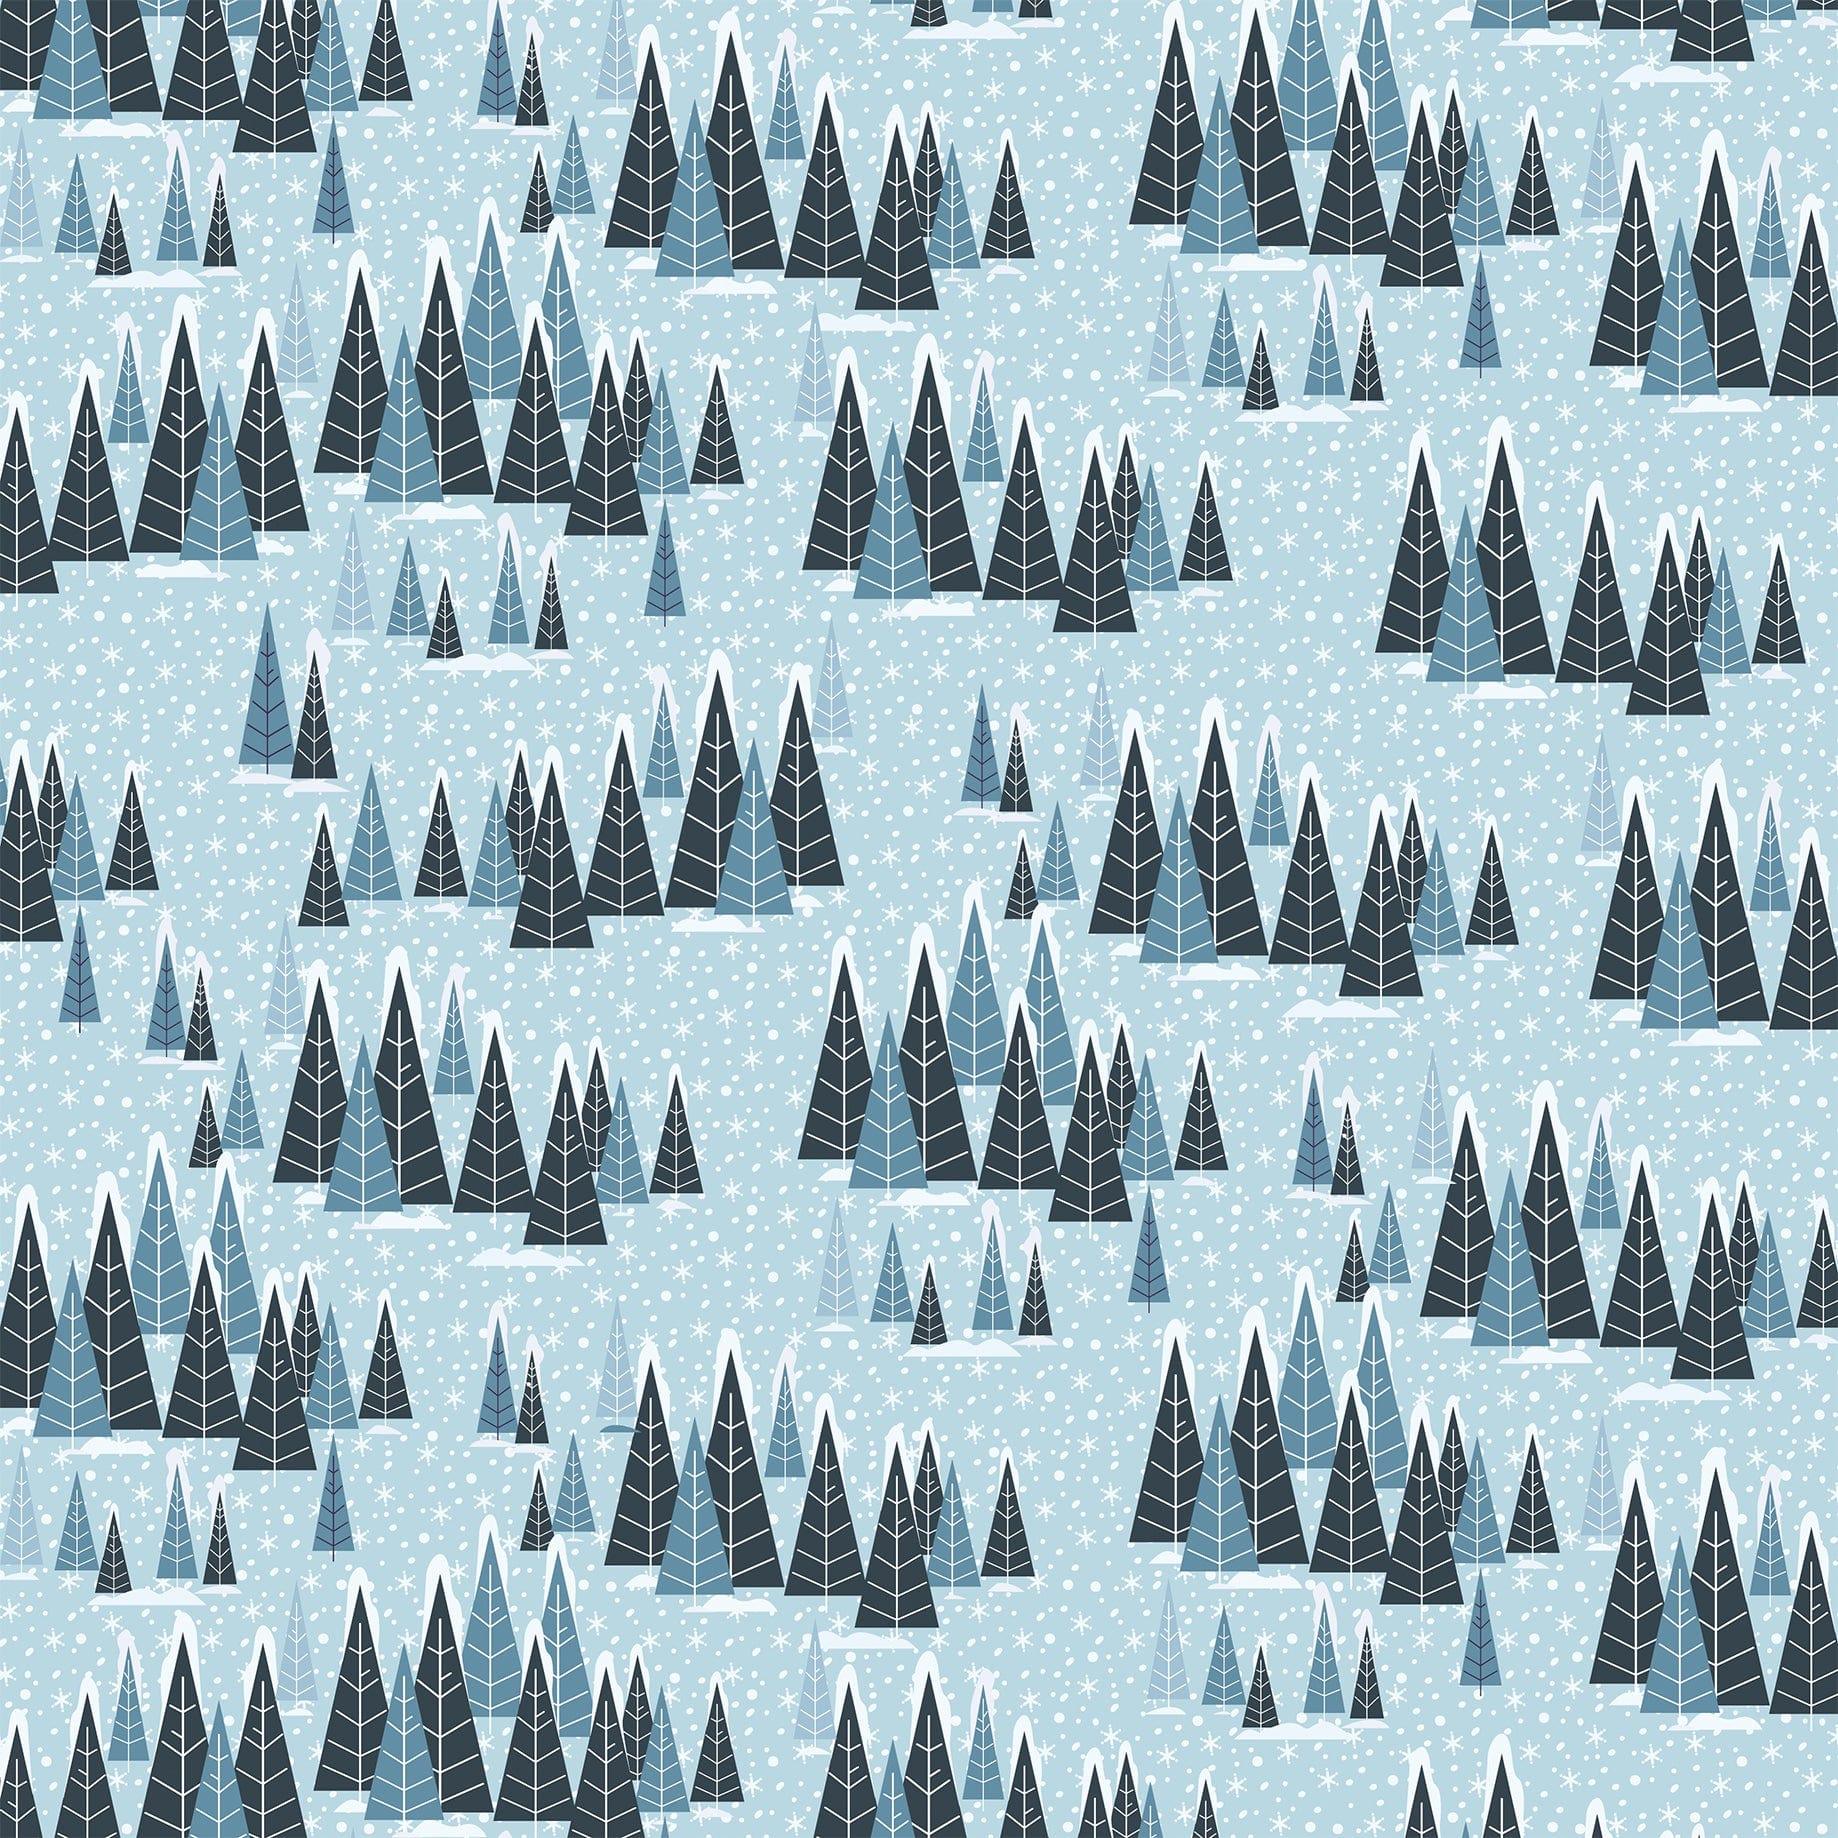 Winter Collection Winter is Magical 12 x 12 Double-Sided Scrapbook Paper by  Echo Park Paper